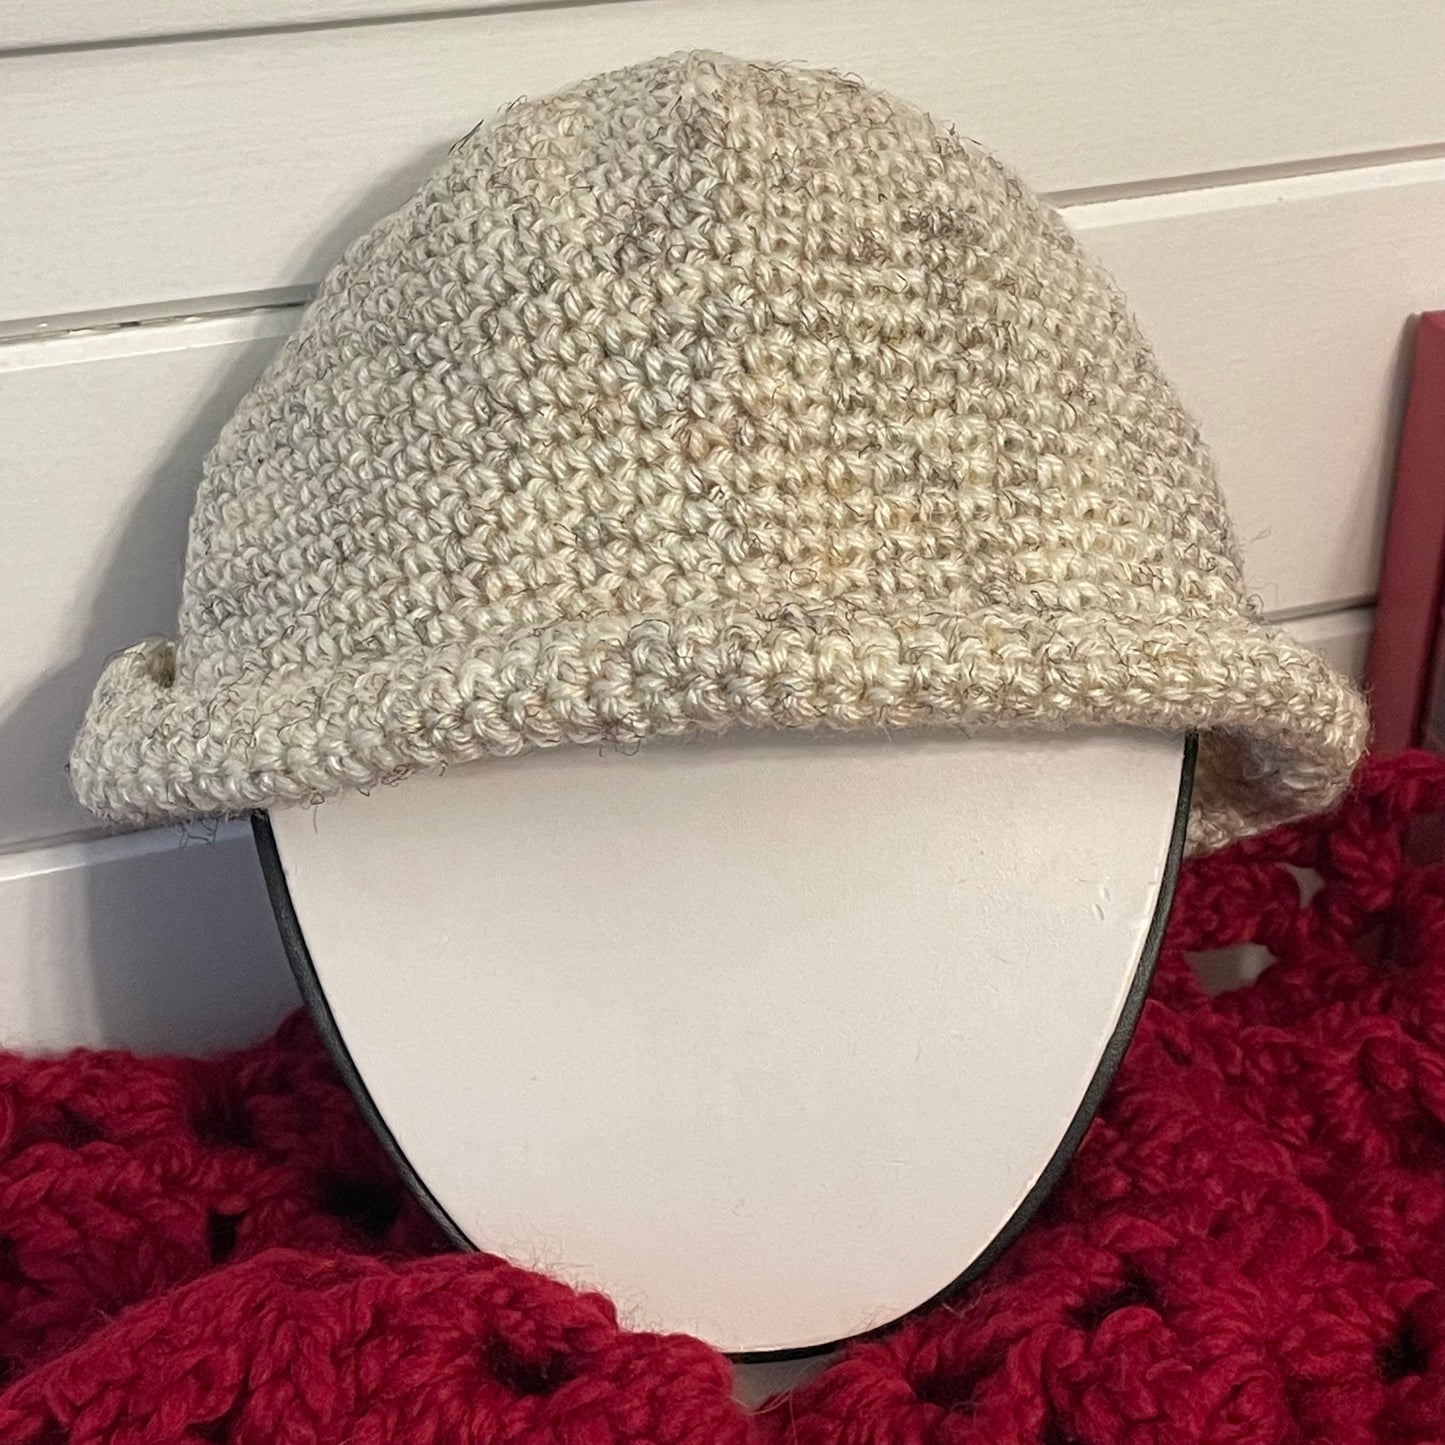 Crochet Rolled Brim Hat in Light Marbled Wheat Hand Crafted Knit Unisex Vintage Retro Style Outdoor